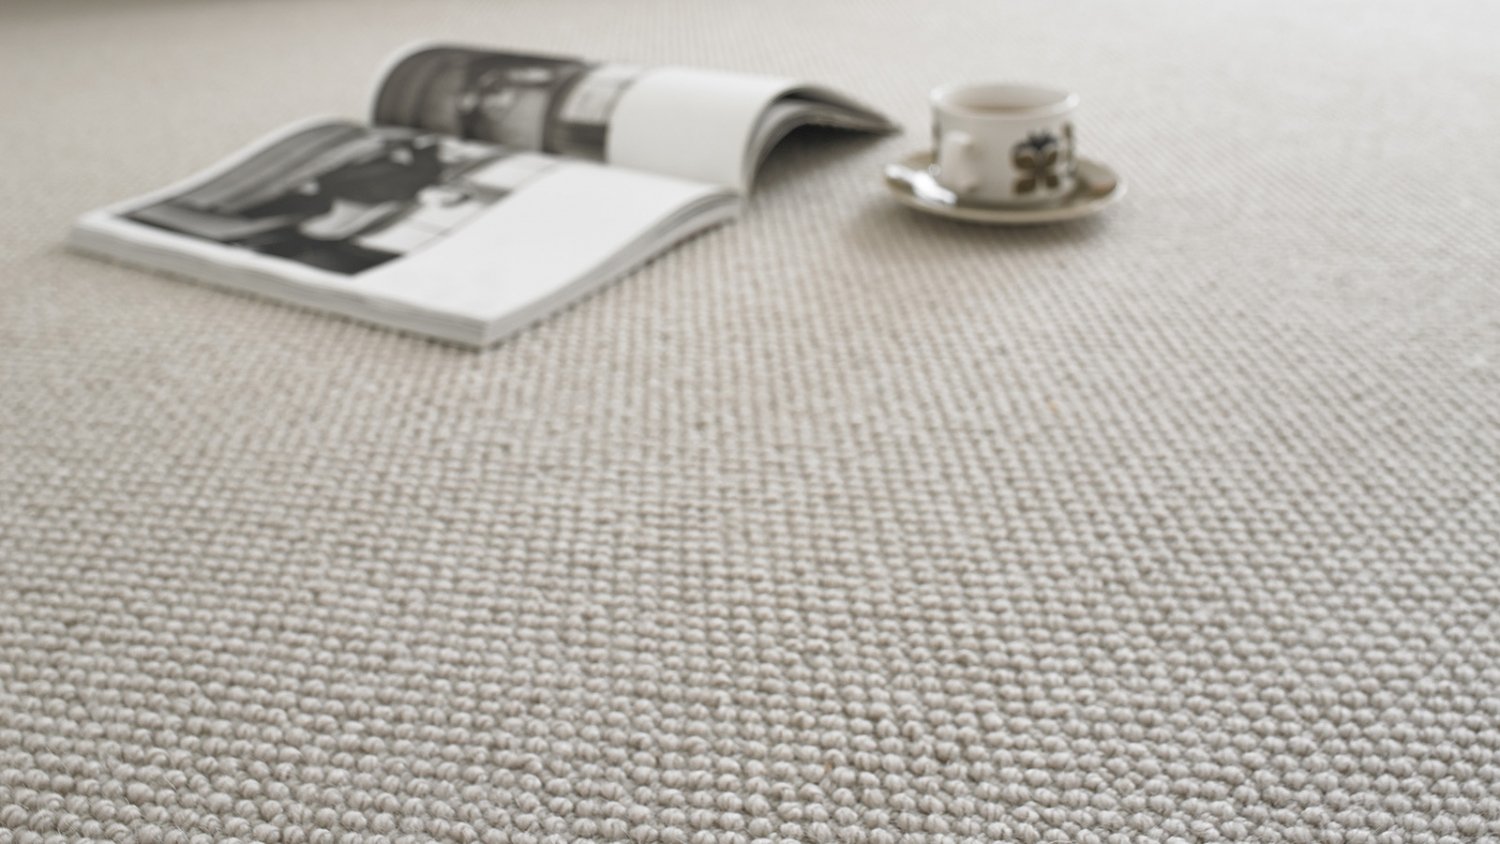 Carpet Care – Your Questions Answered